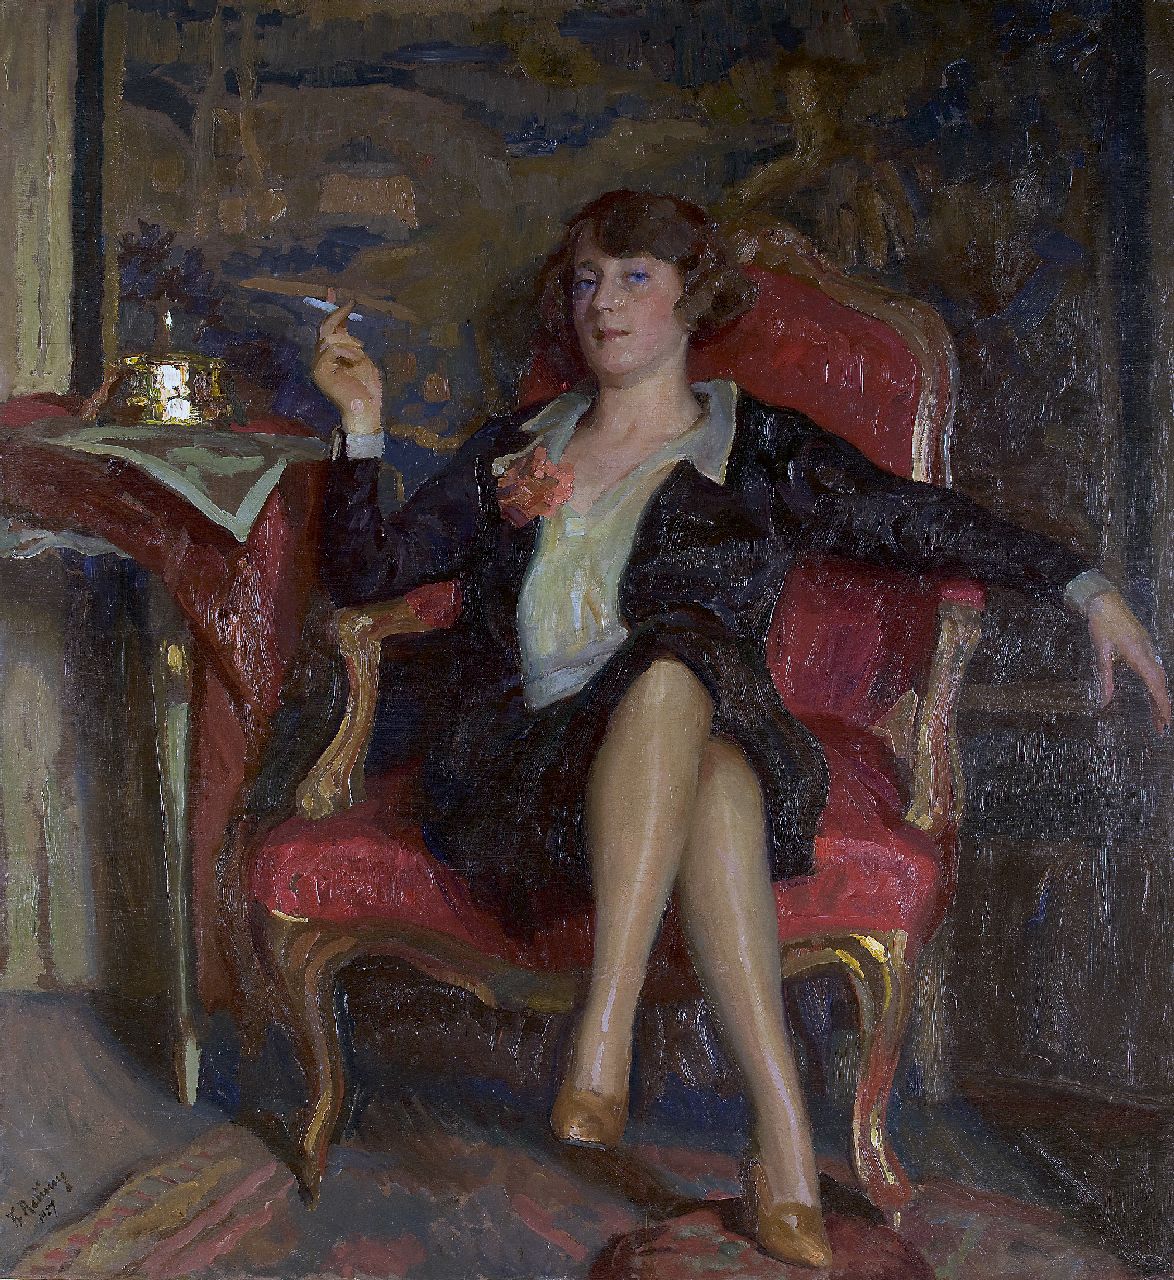 Reusing R.F.  | Richard Friedrich 'Fritz' Reusing, A portrait of a smoking lady, oil on panel 151.2 x 137.8 cm, signed l.l. and dated 1927